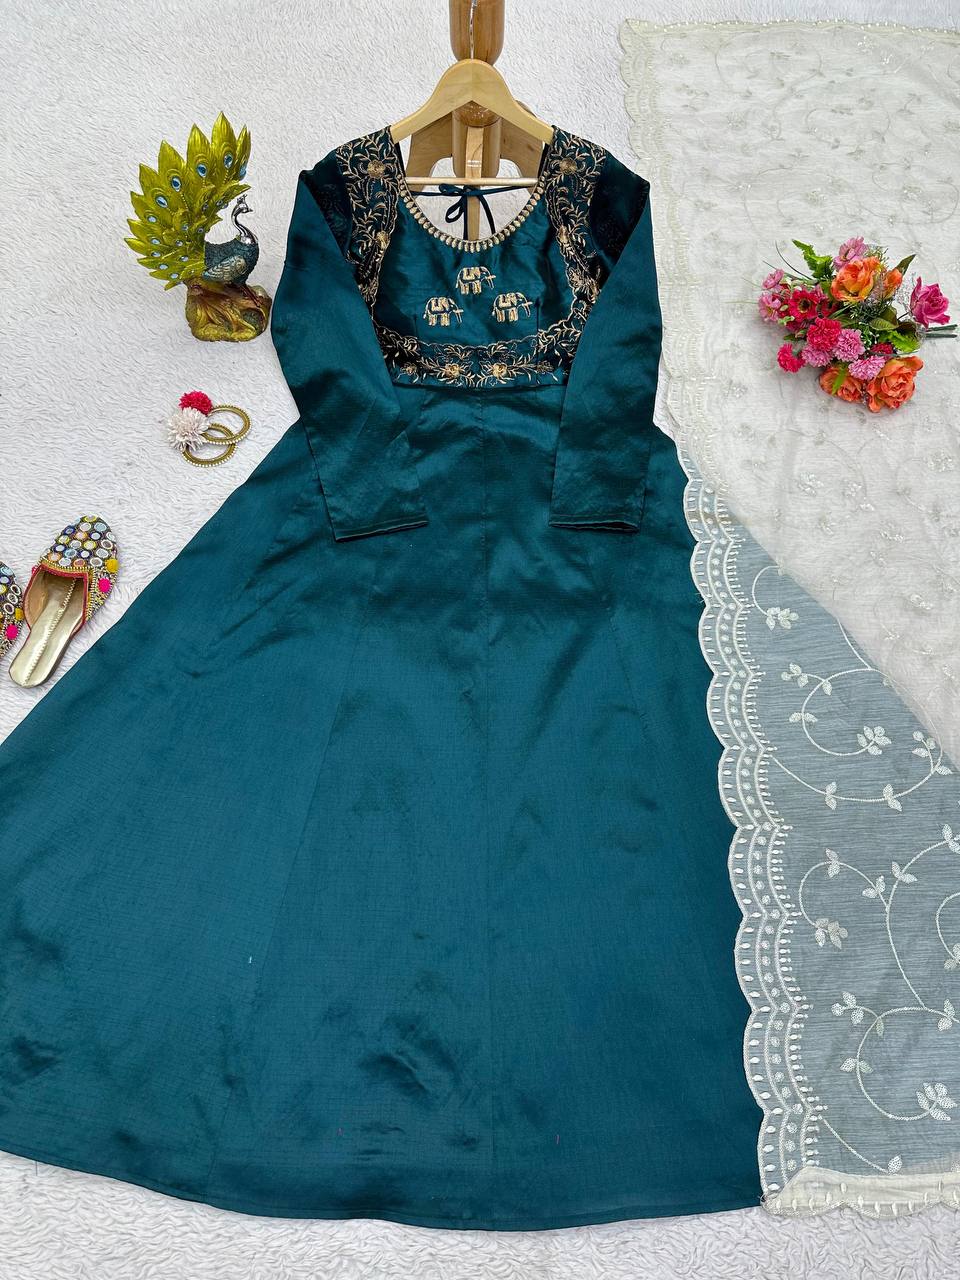 Kinjal Dave Wear Teal Blue Color Gown With Dupatta